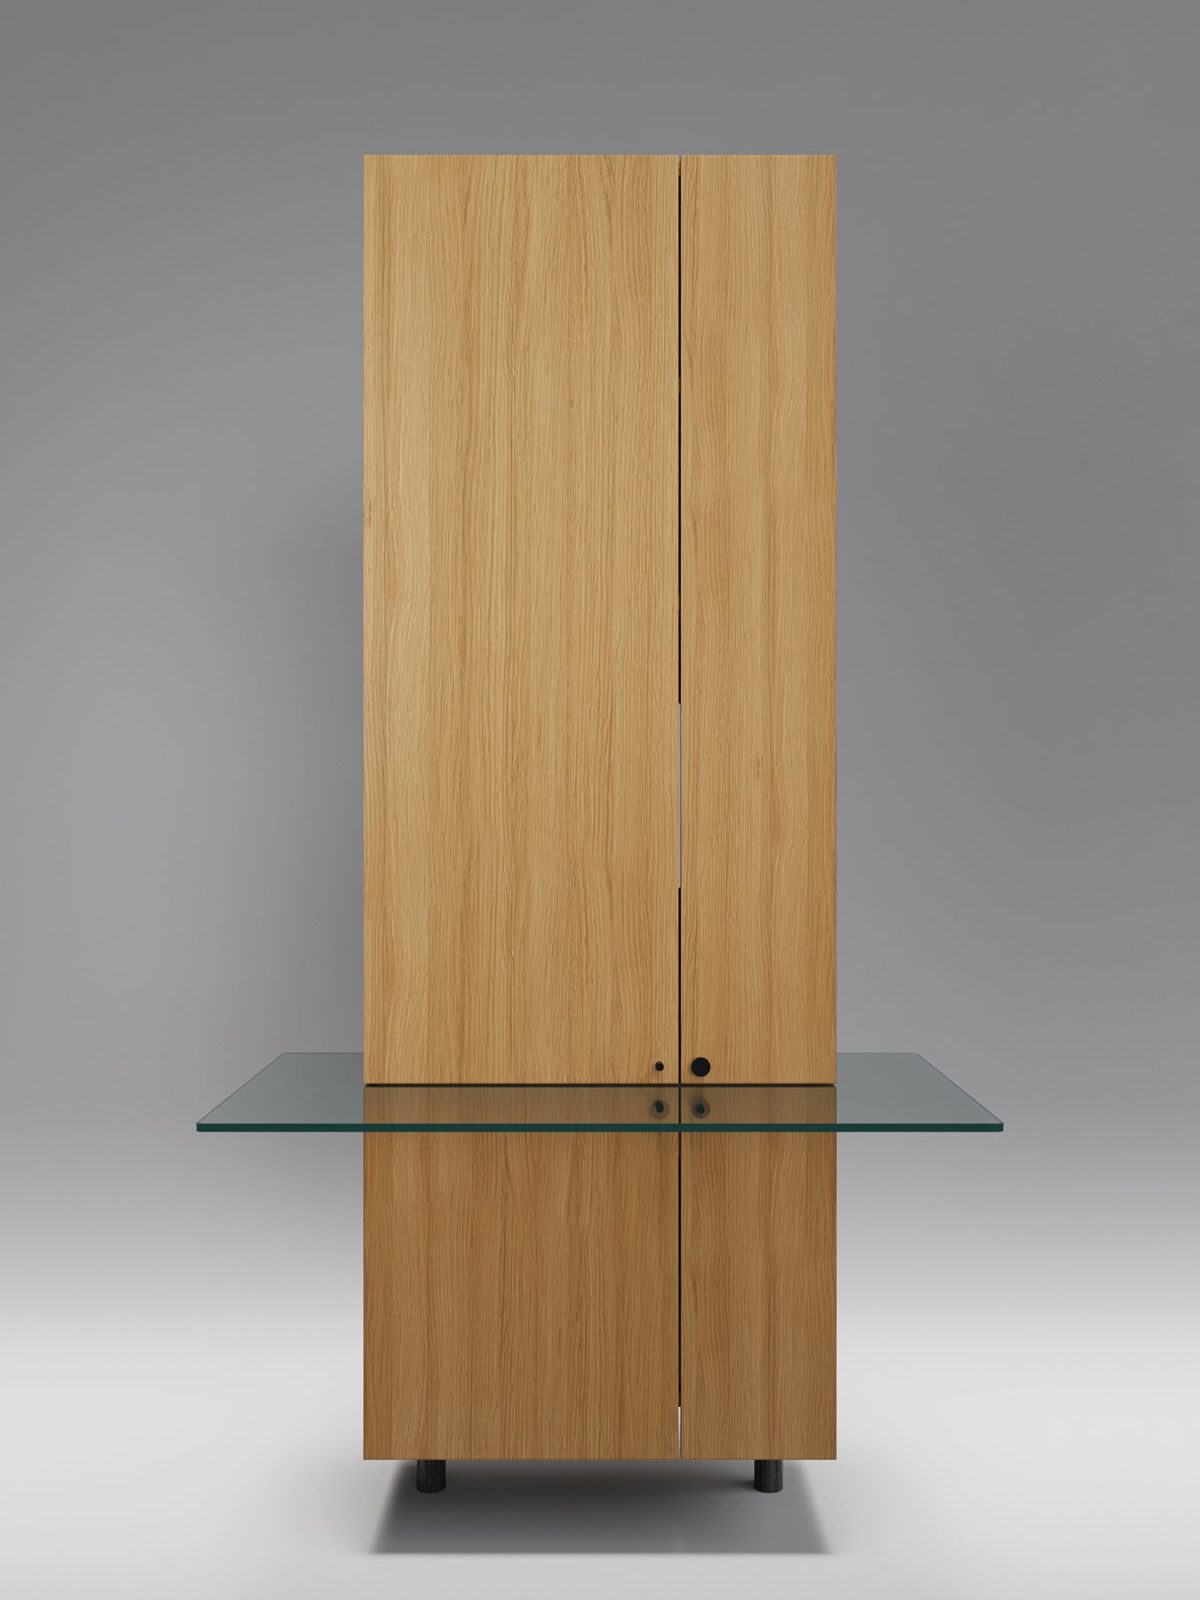 Thea Workspace for Home - Thea 1 - Oak veneer - Tempered glass desk.